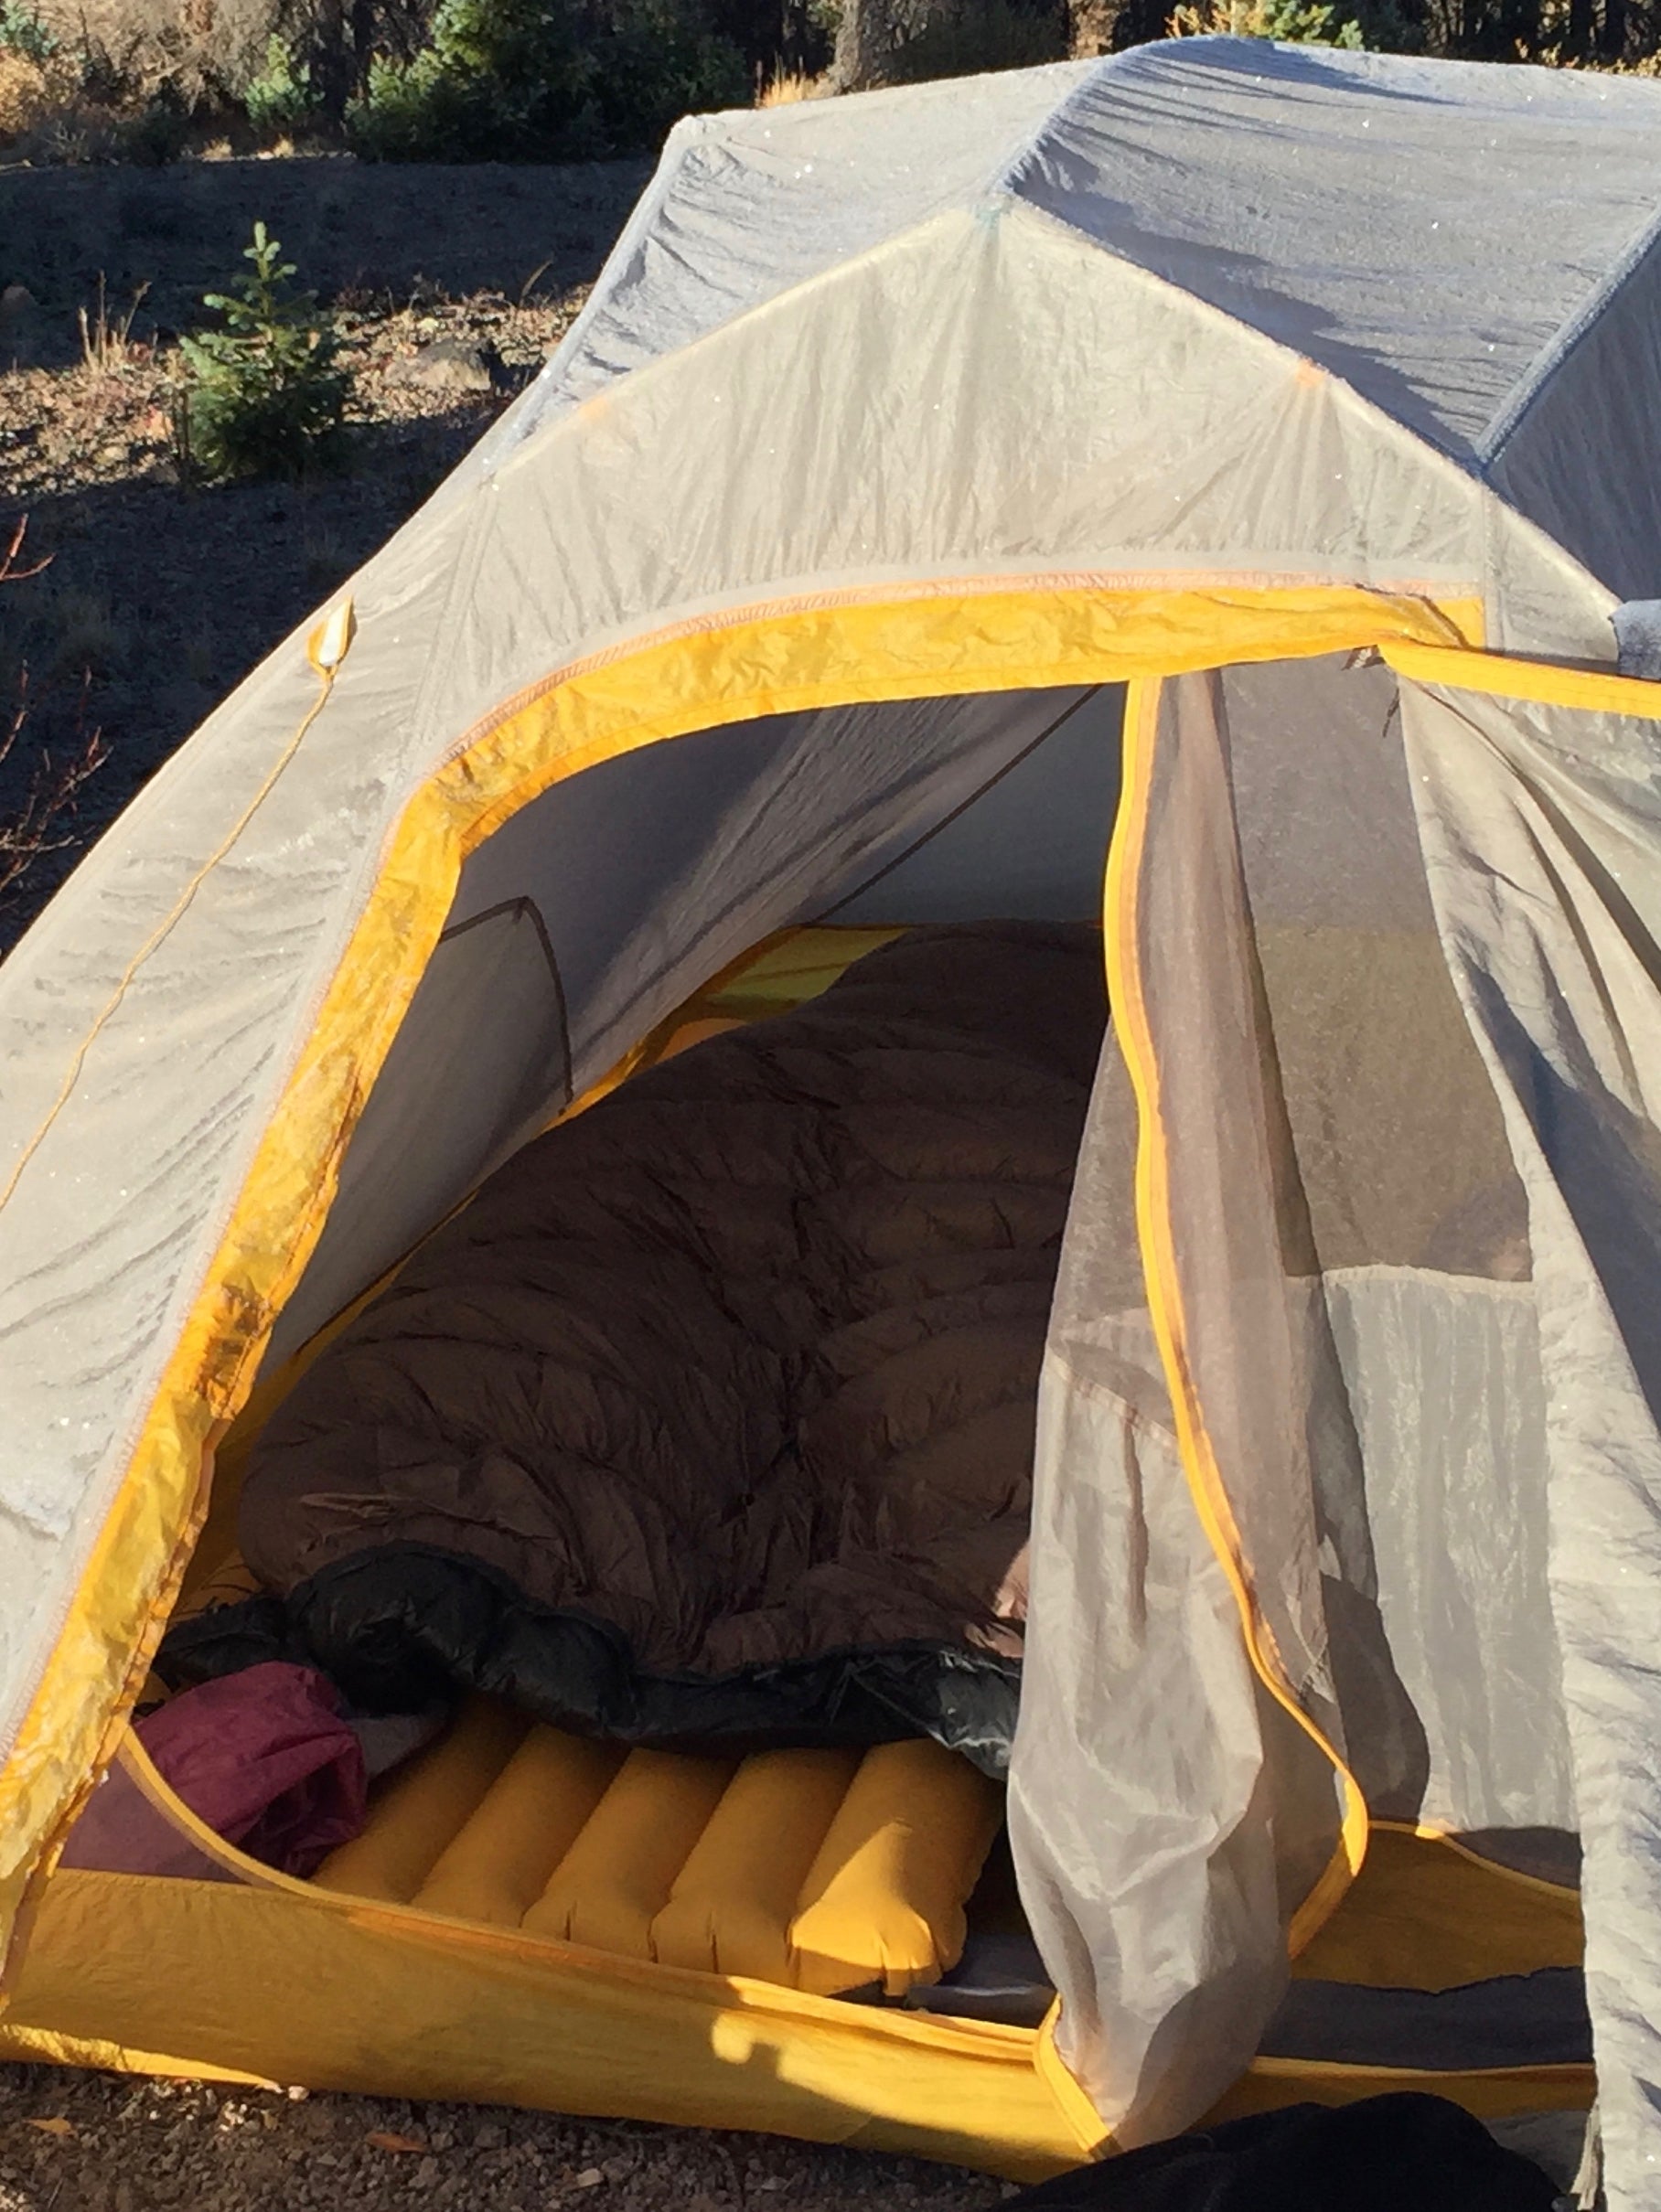 Katabatic Quilt with sleeping pad in tent